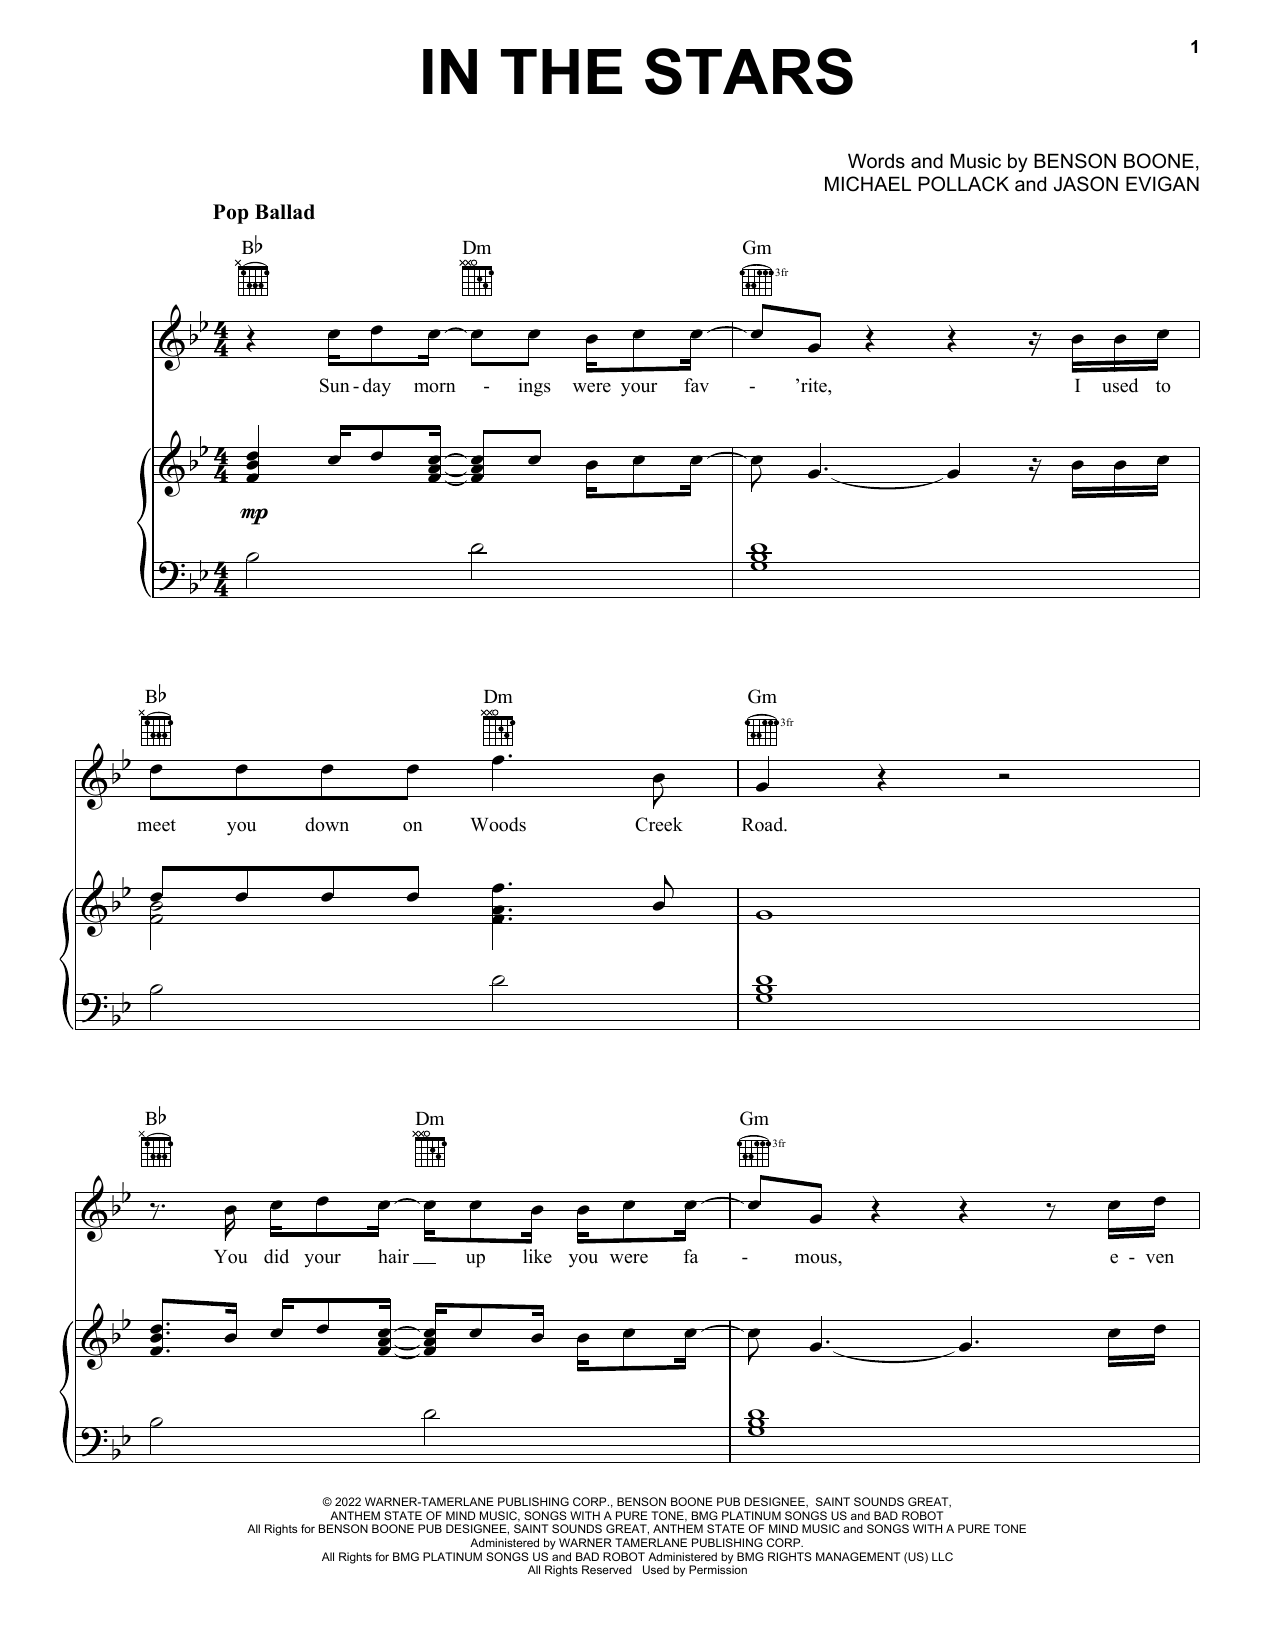 Benson Boone In The Stars sheet music notes and chords. Download Printable PDF.